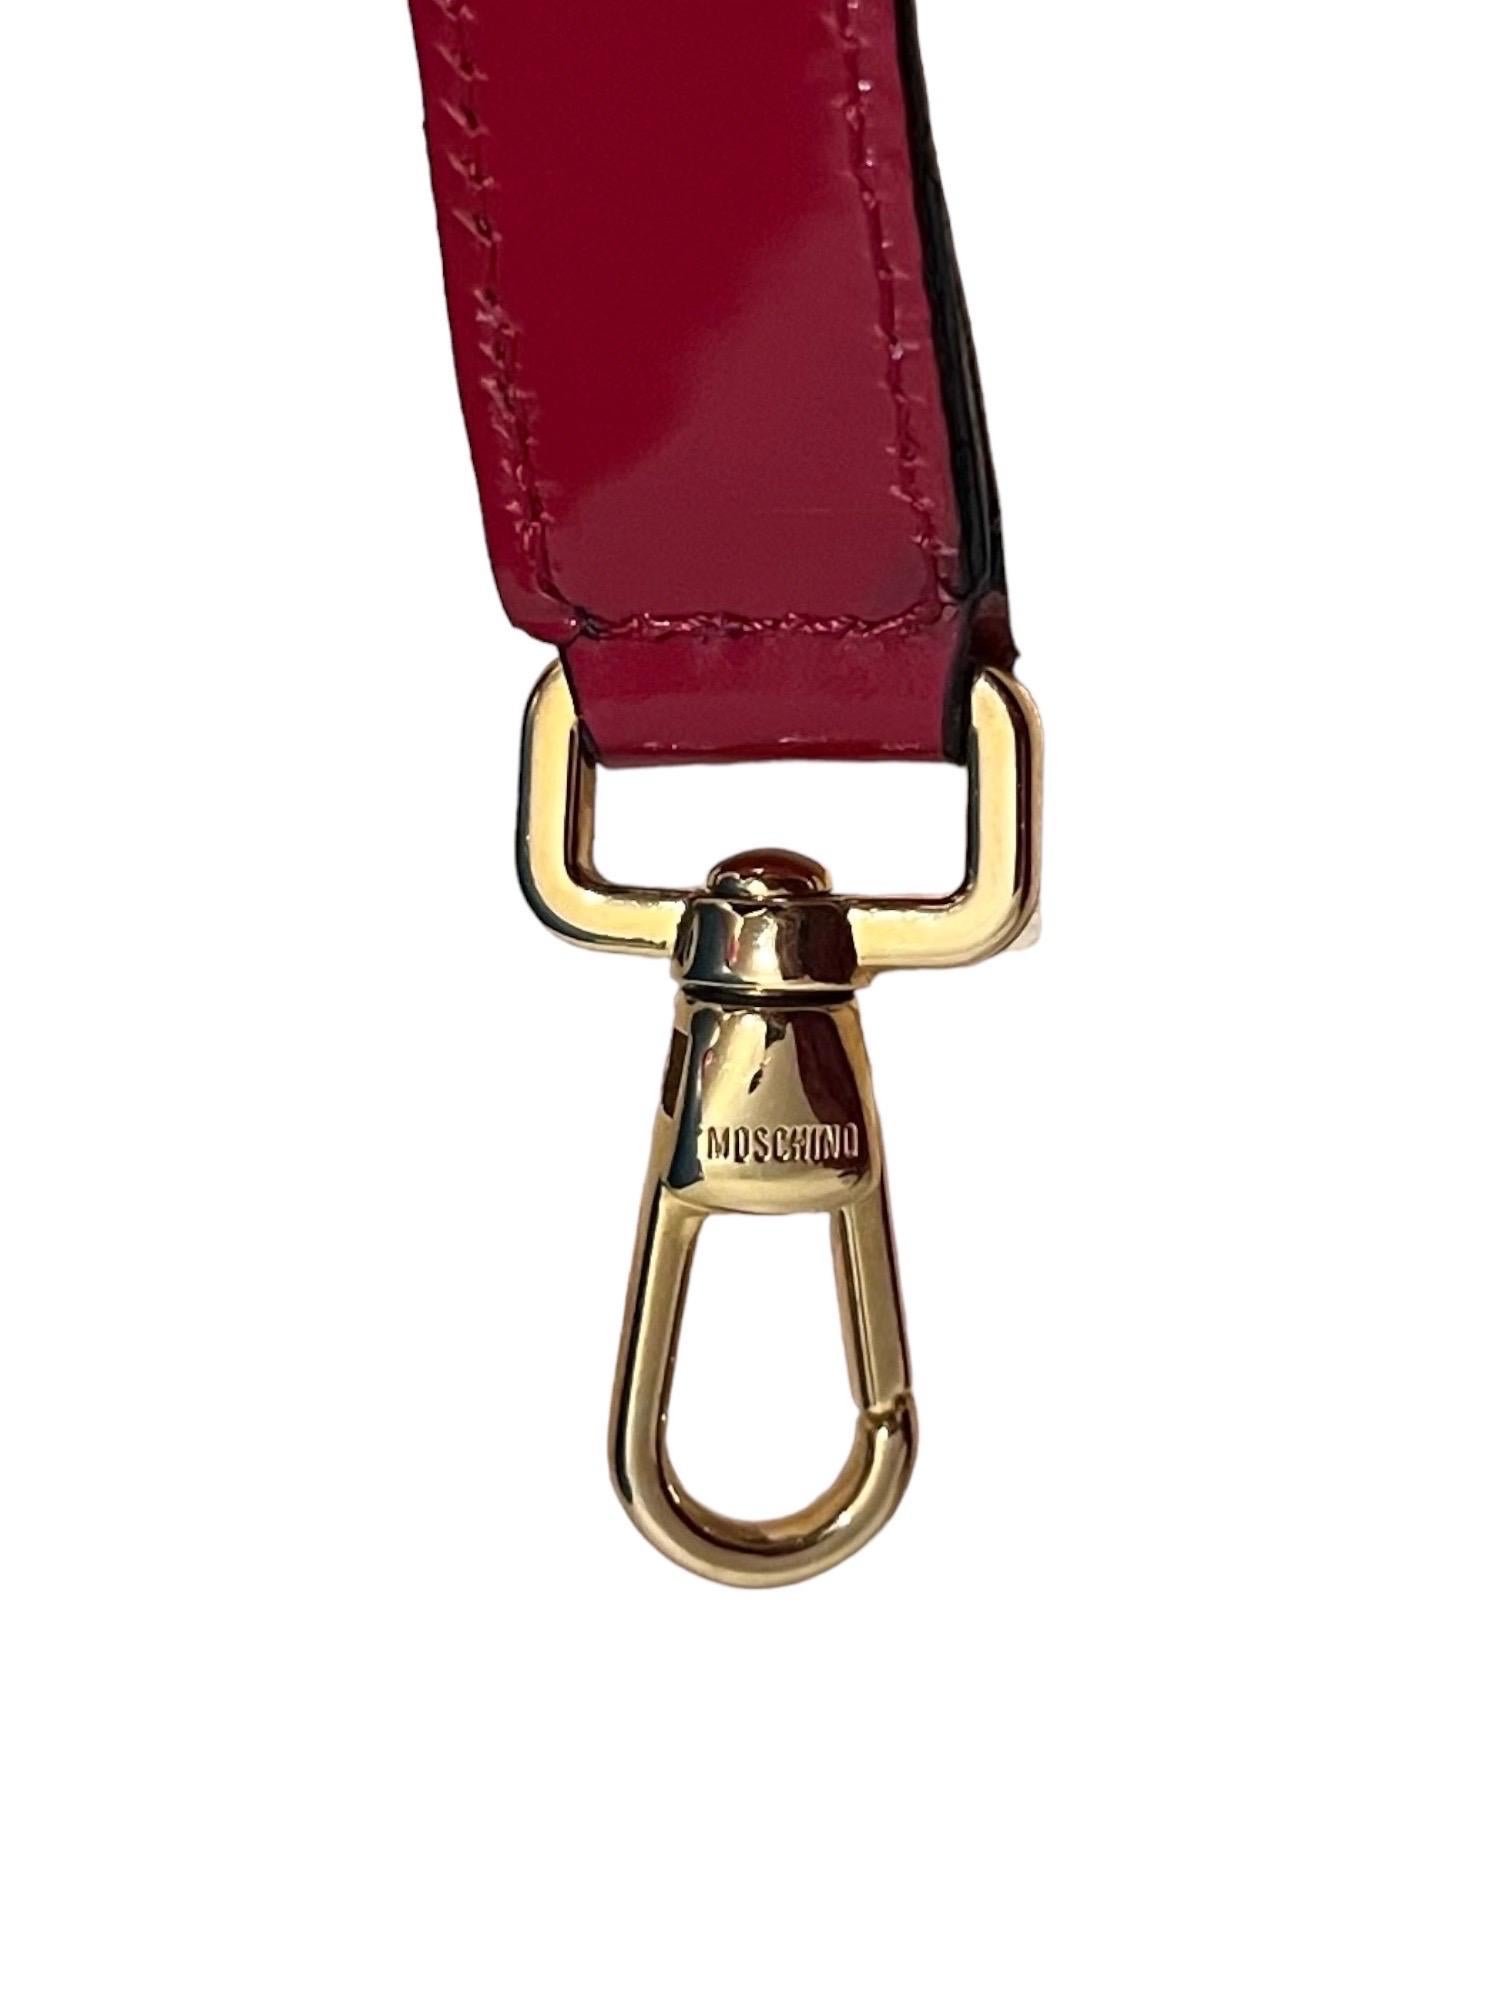 Moschino Vintage Red Leather Heart Bag The Nanny 11